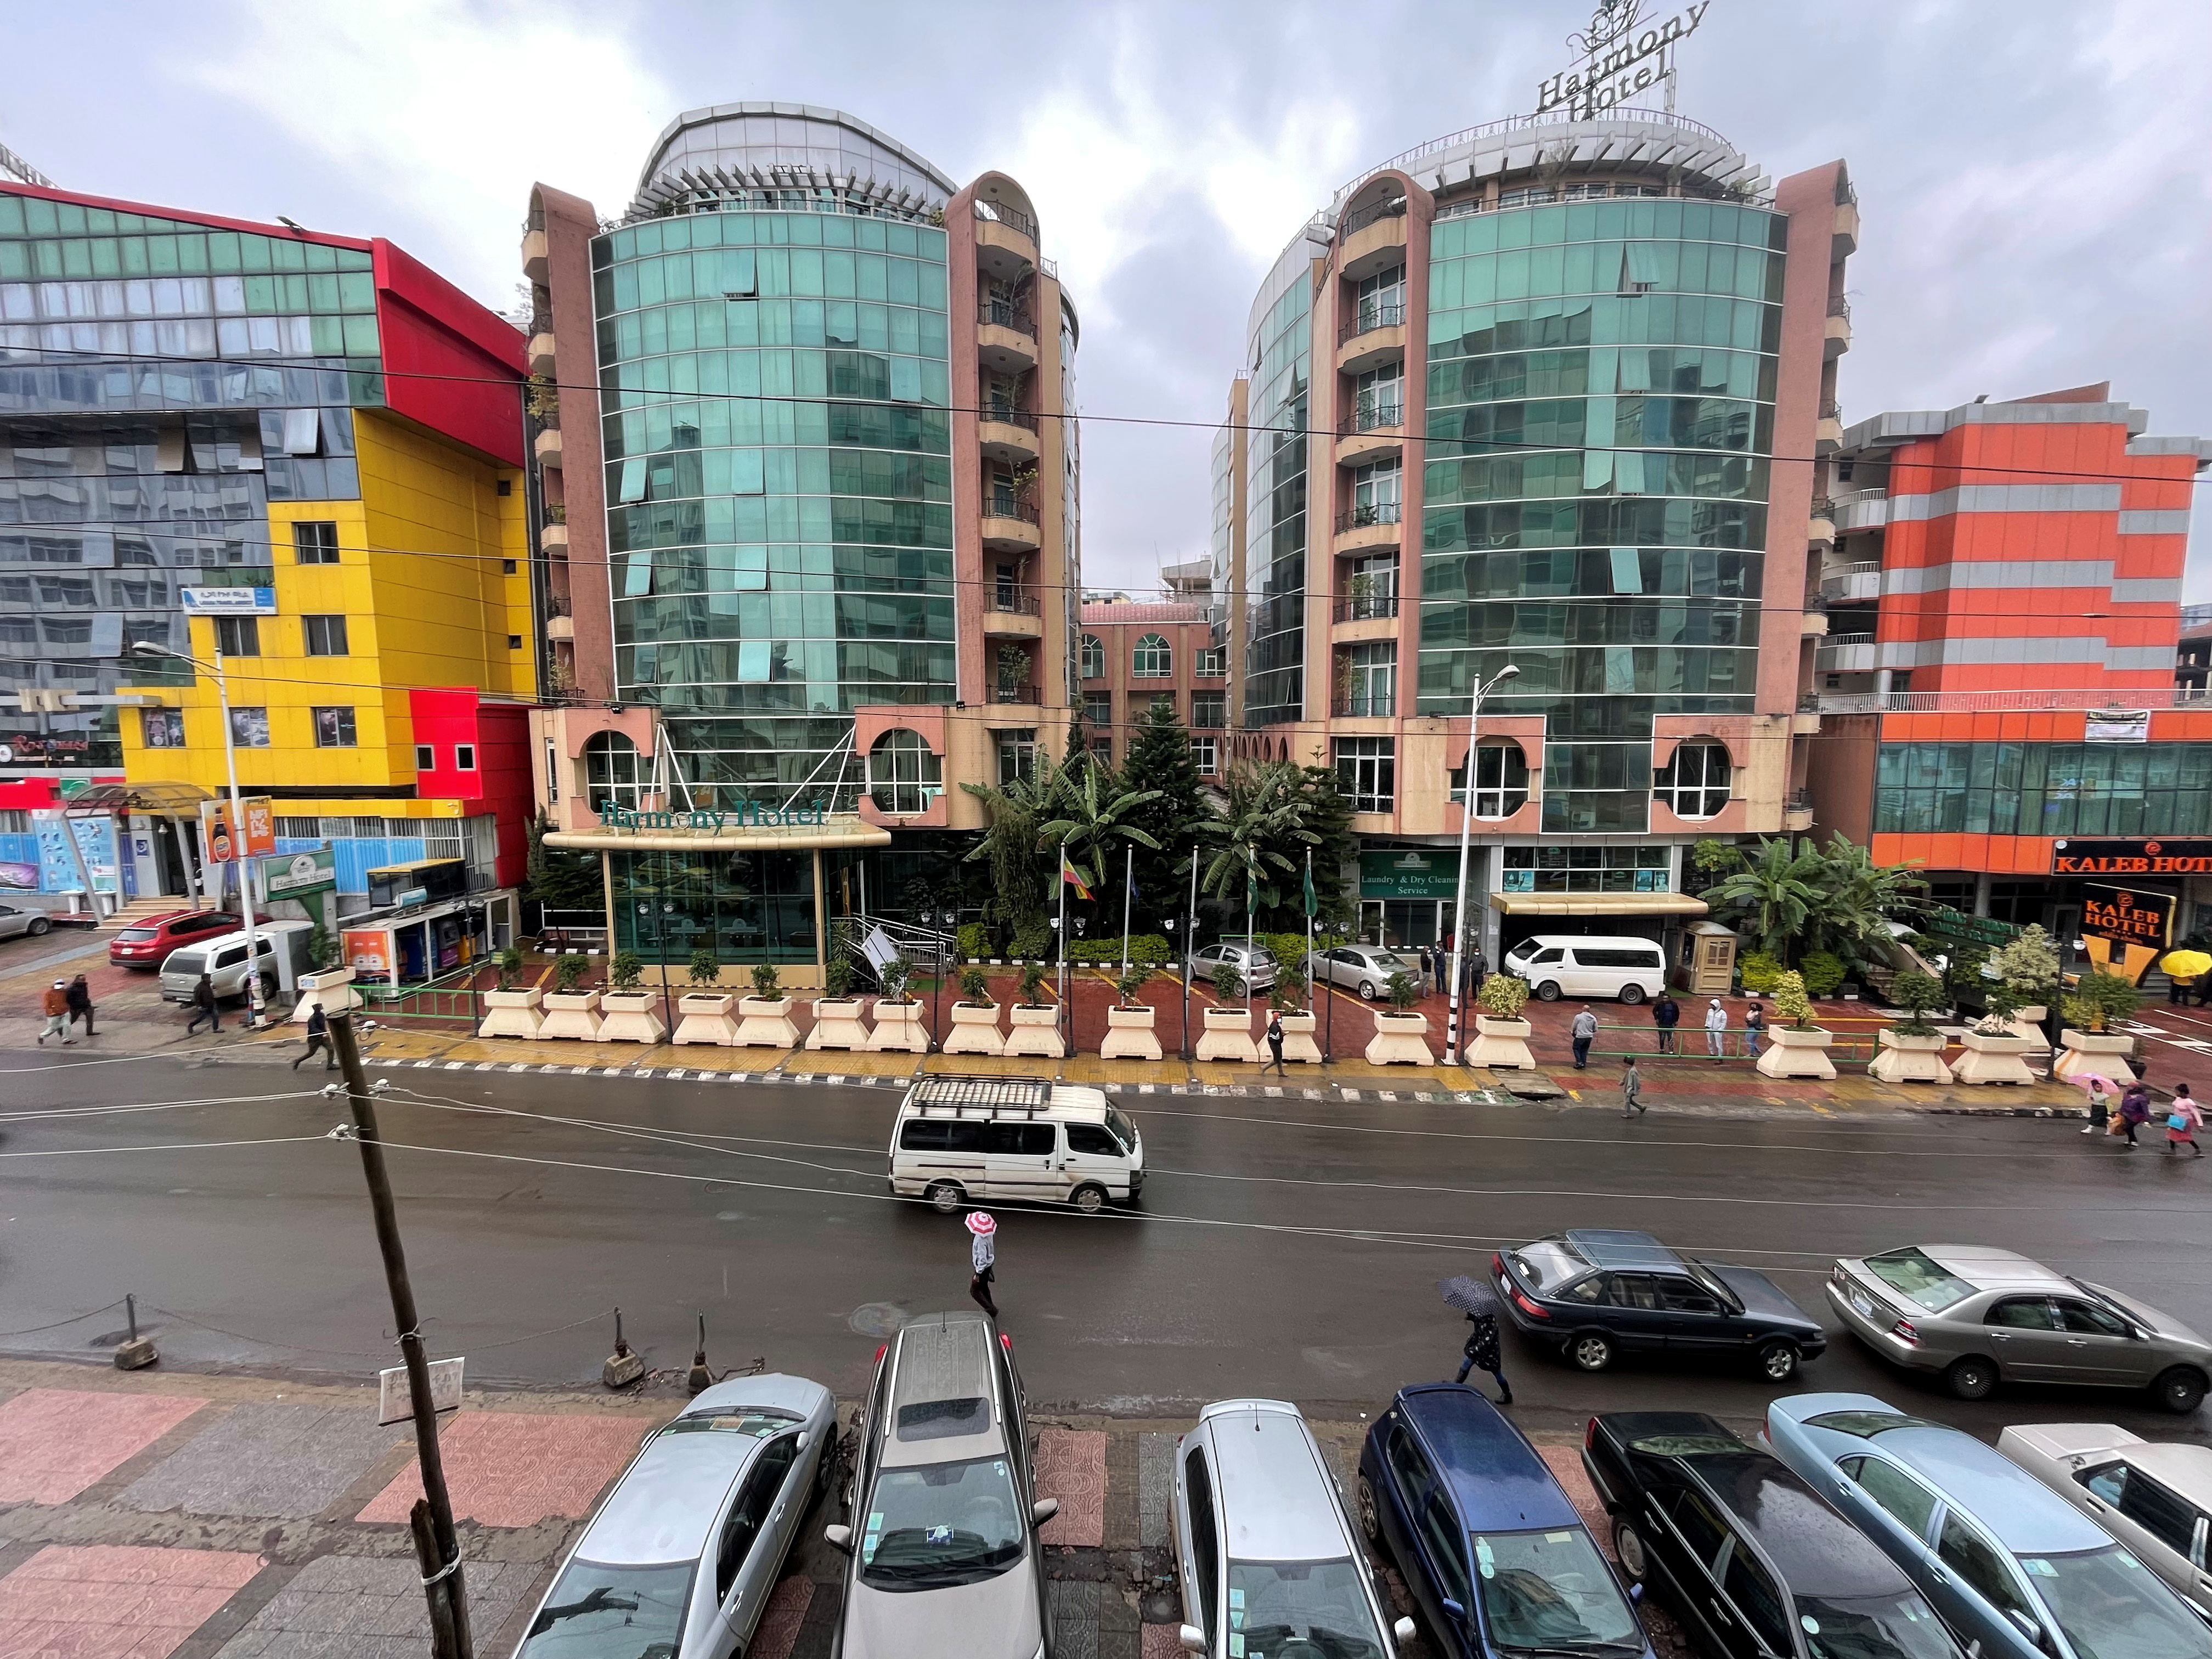 A general view shows activity past a closed Harmony Hotel and Kaleb hotel owned by a Tigrayan businessmen in Bole neighbourhood in Addis Ababa